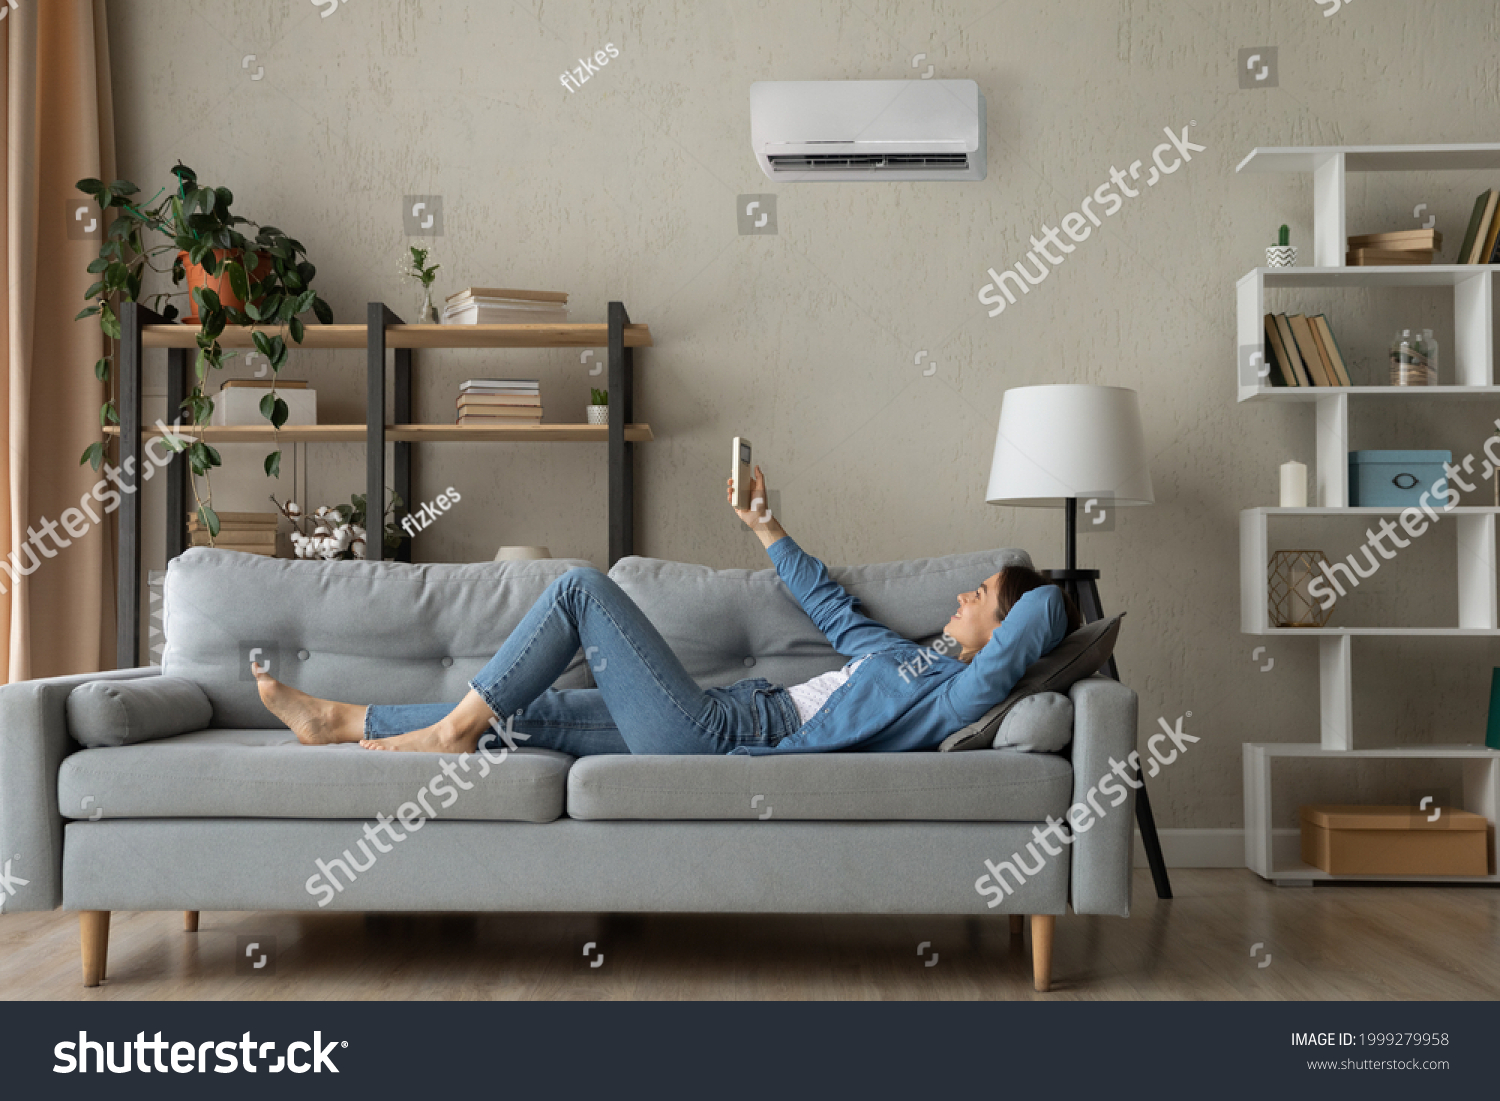 Full length relaxed young happy woman homeowner lying on comfortable sofa turning on air conditioner with remote controller, breathing fresh air, enjoying lazy weekend time, meditating in living room. #1999279958